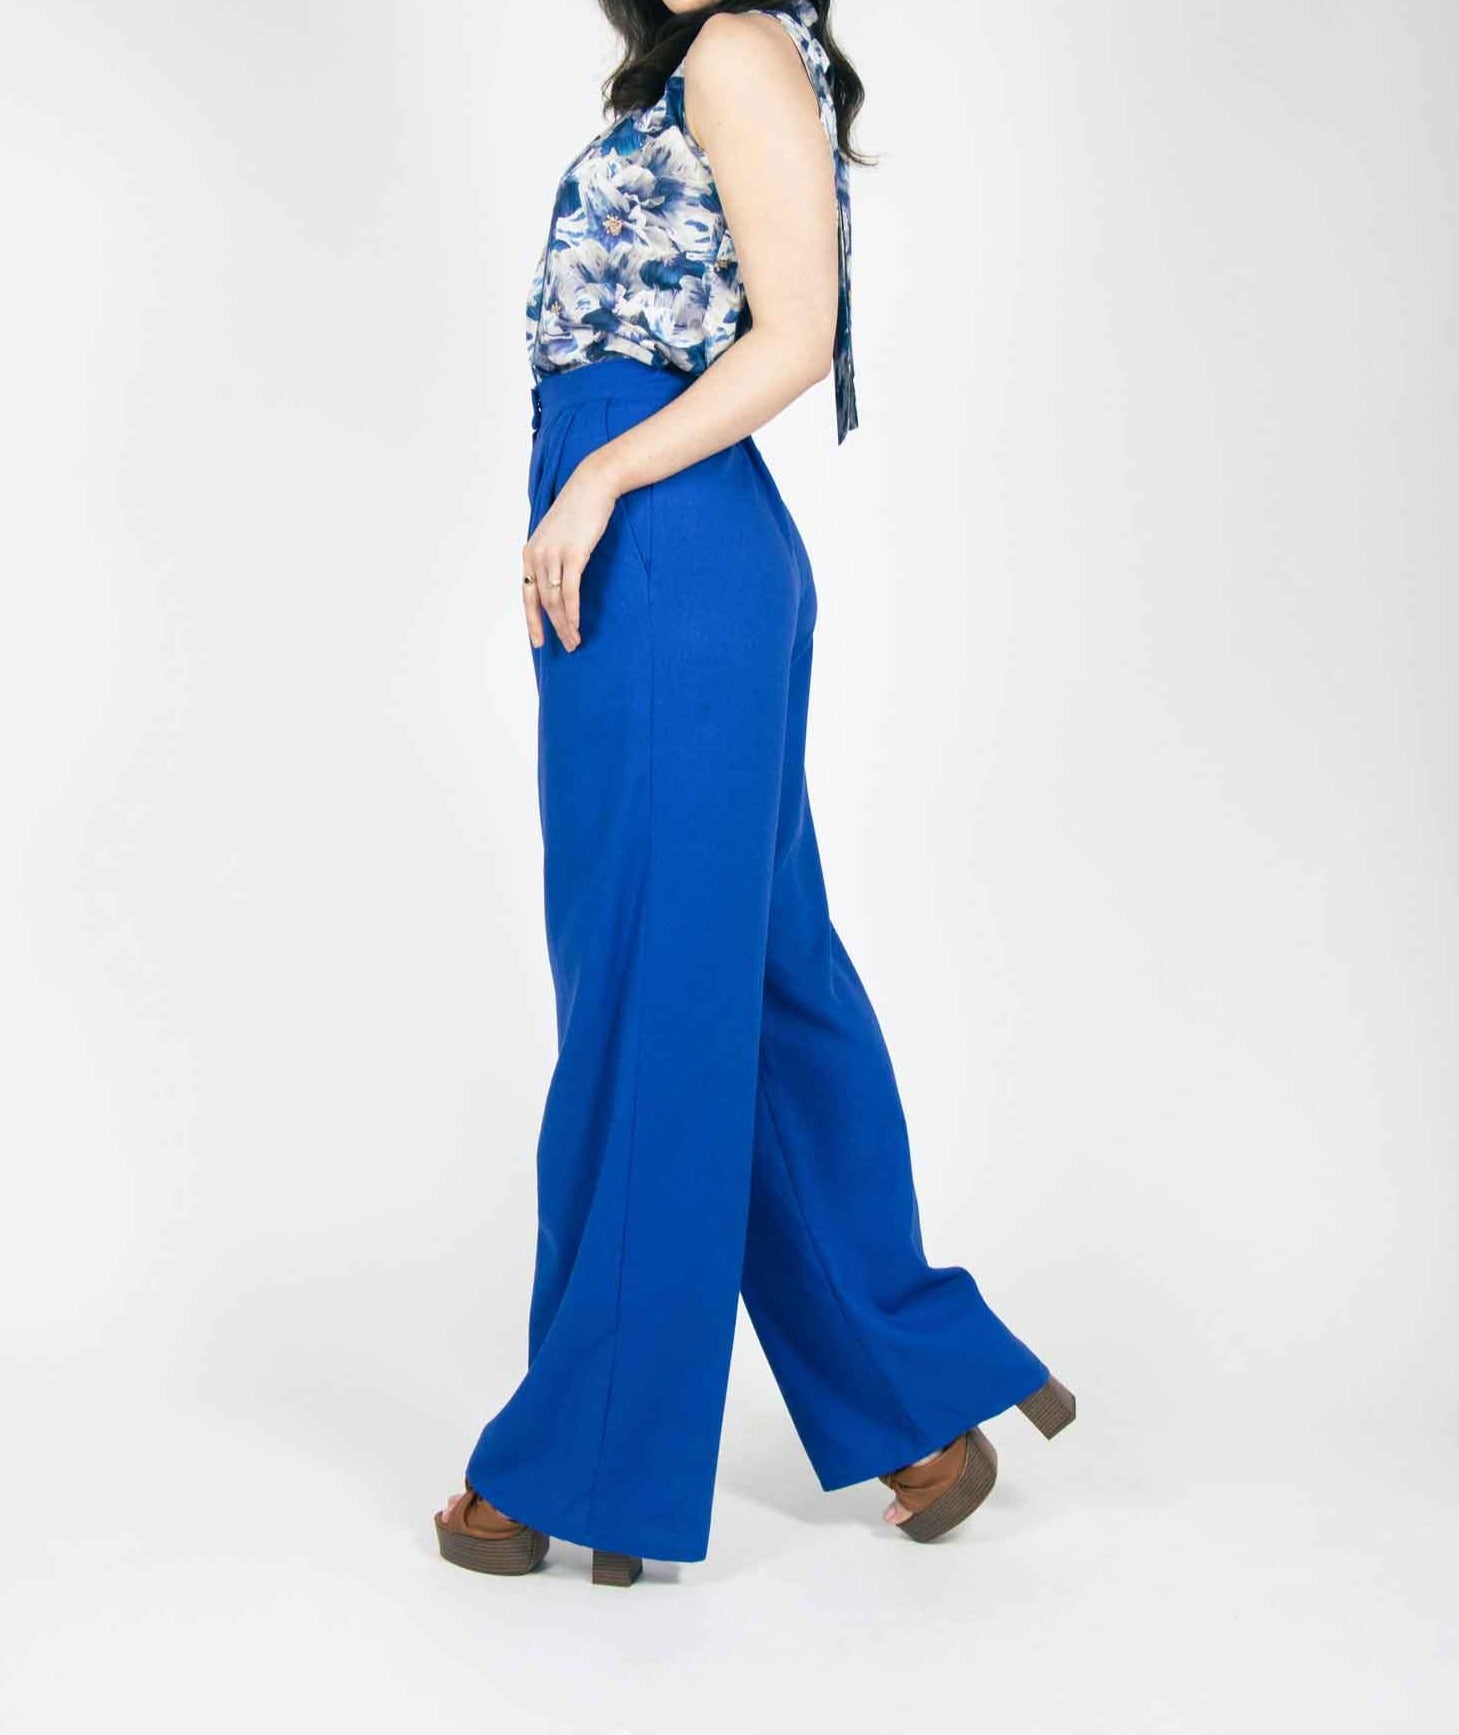 blue linen wide leg trouser retro style fashion. Blue sleeveless top with large white and blue flowers 